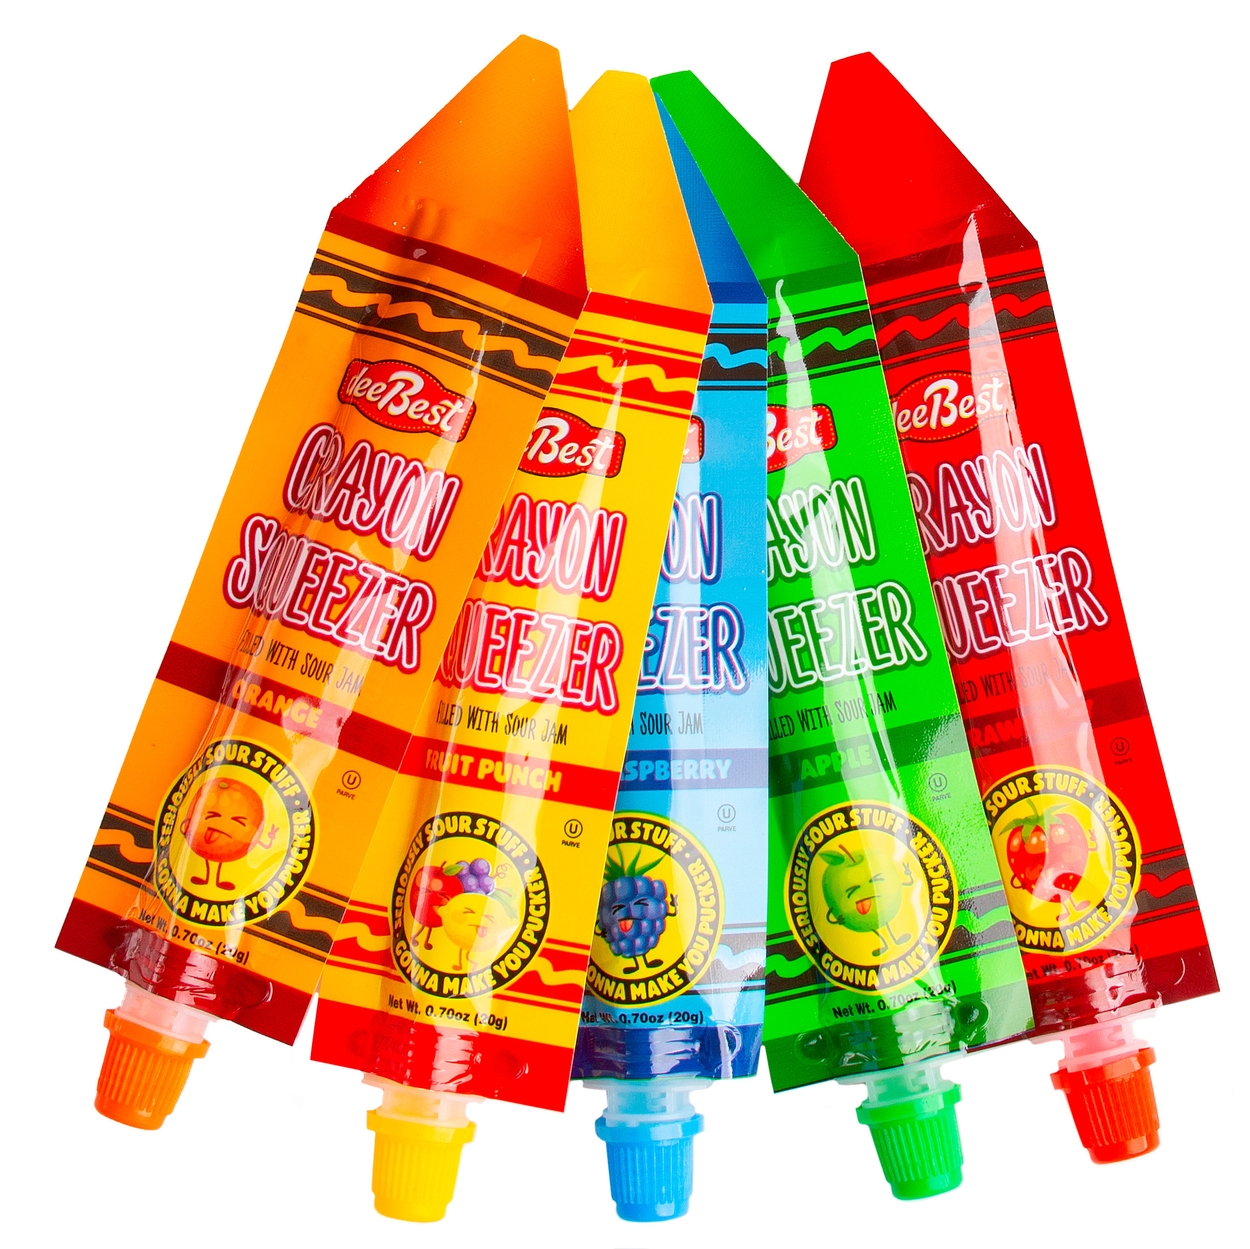 Crayon Squeezers Candy Sour Gel - 12CT Bag • Candy Mini Packs